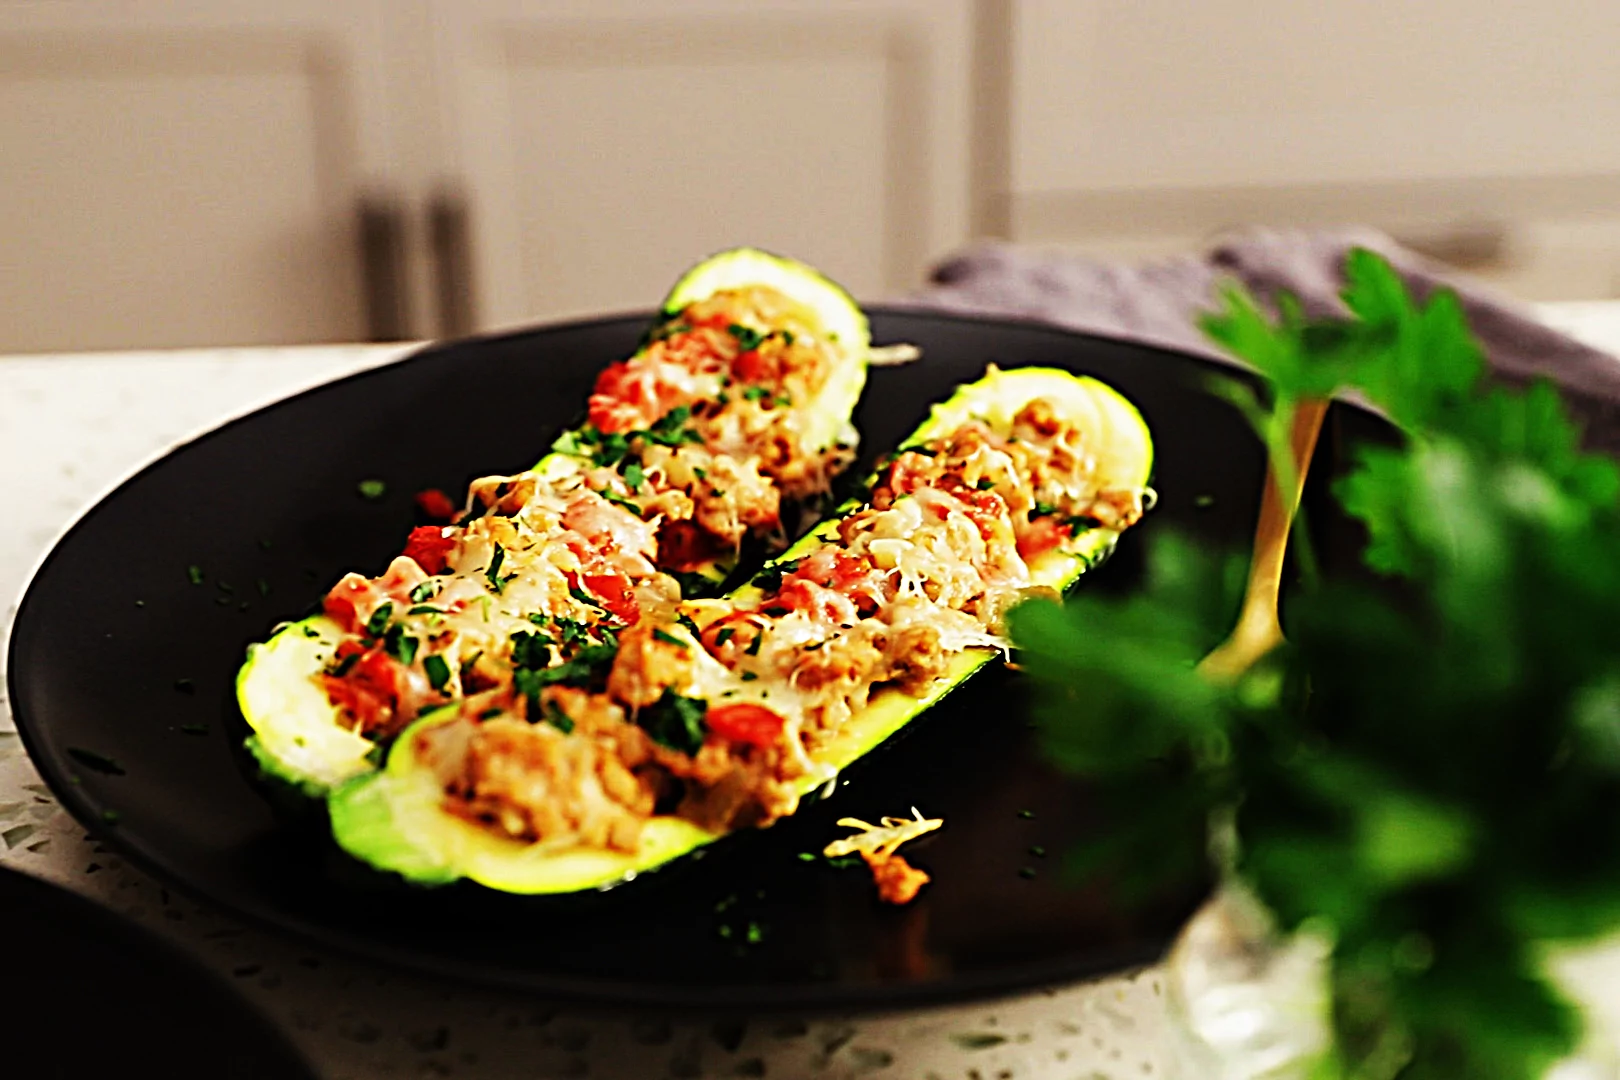 Stupid-Easy Recipe for Grain-Free Zucchini Boats (#1 Top-Rated)